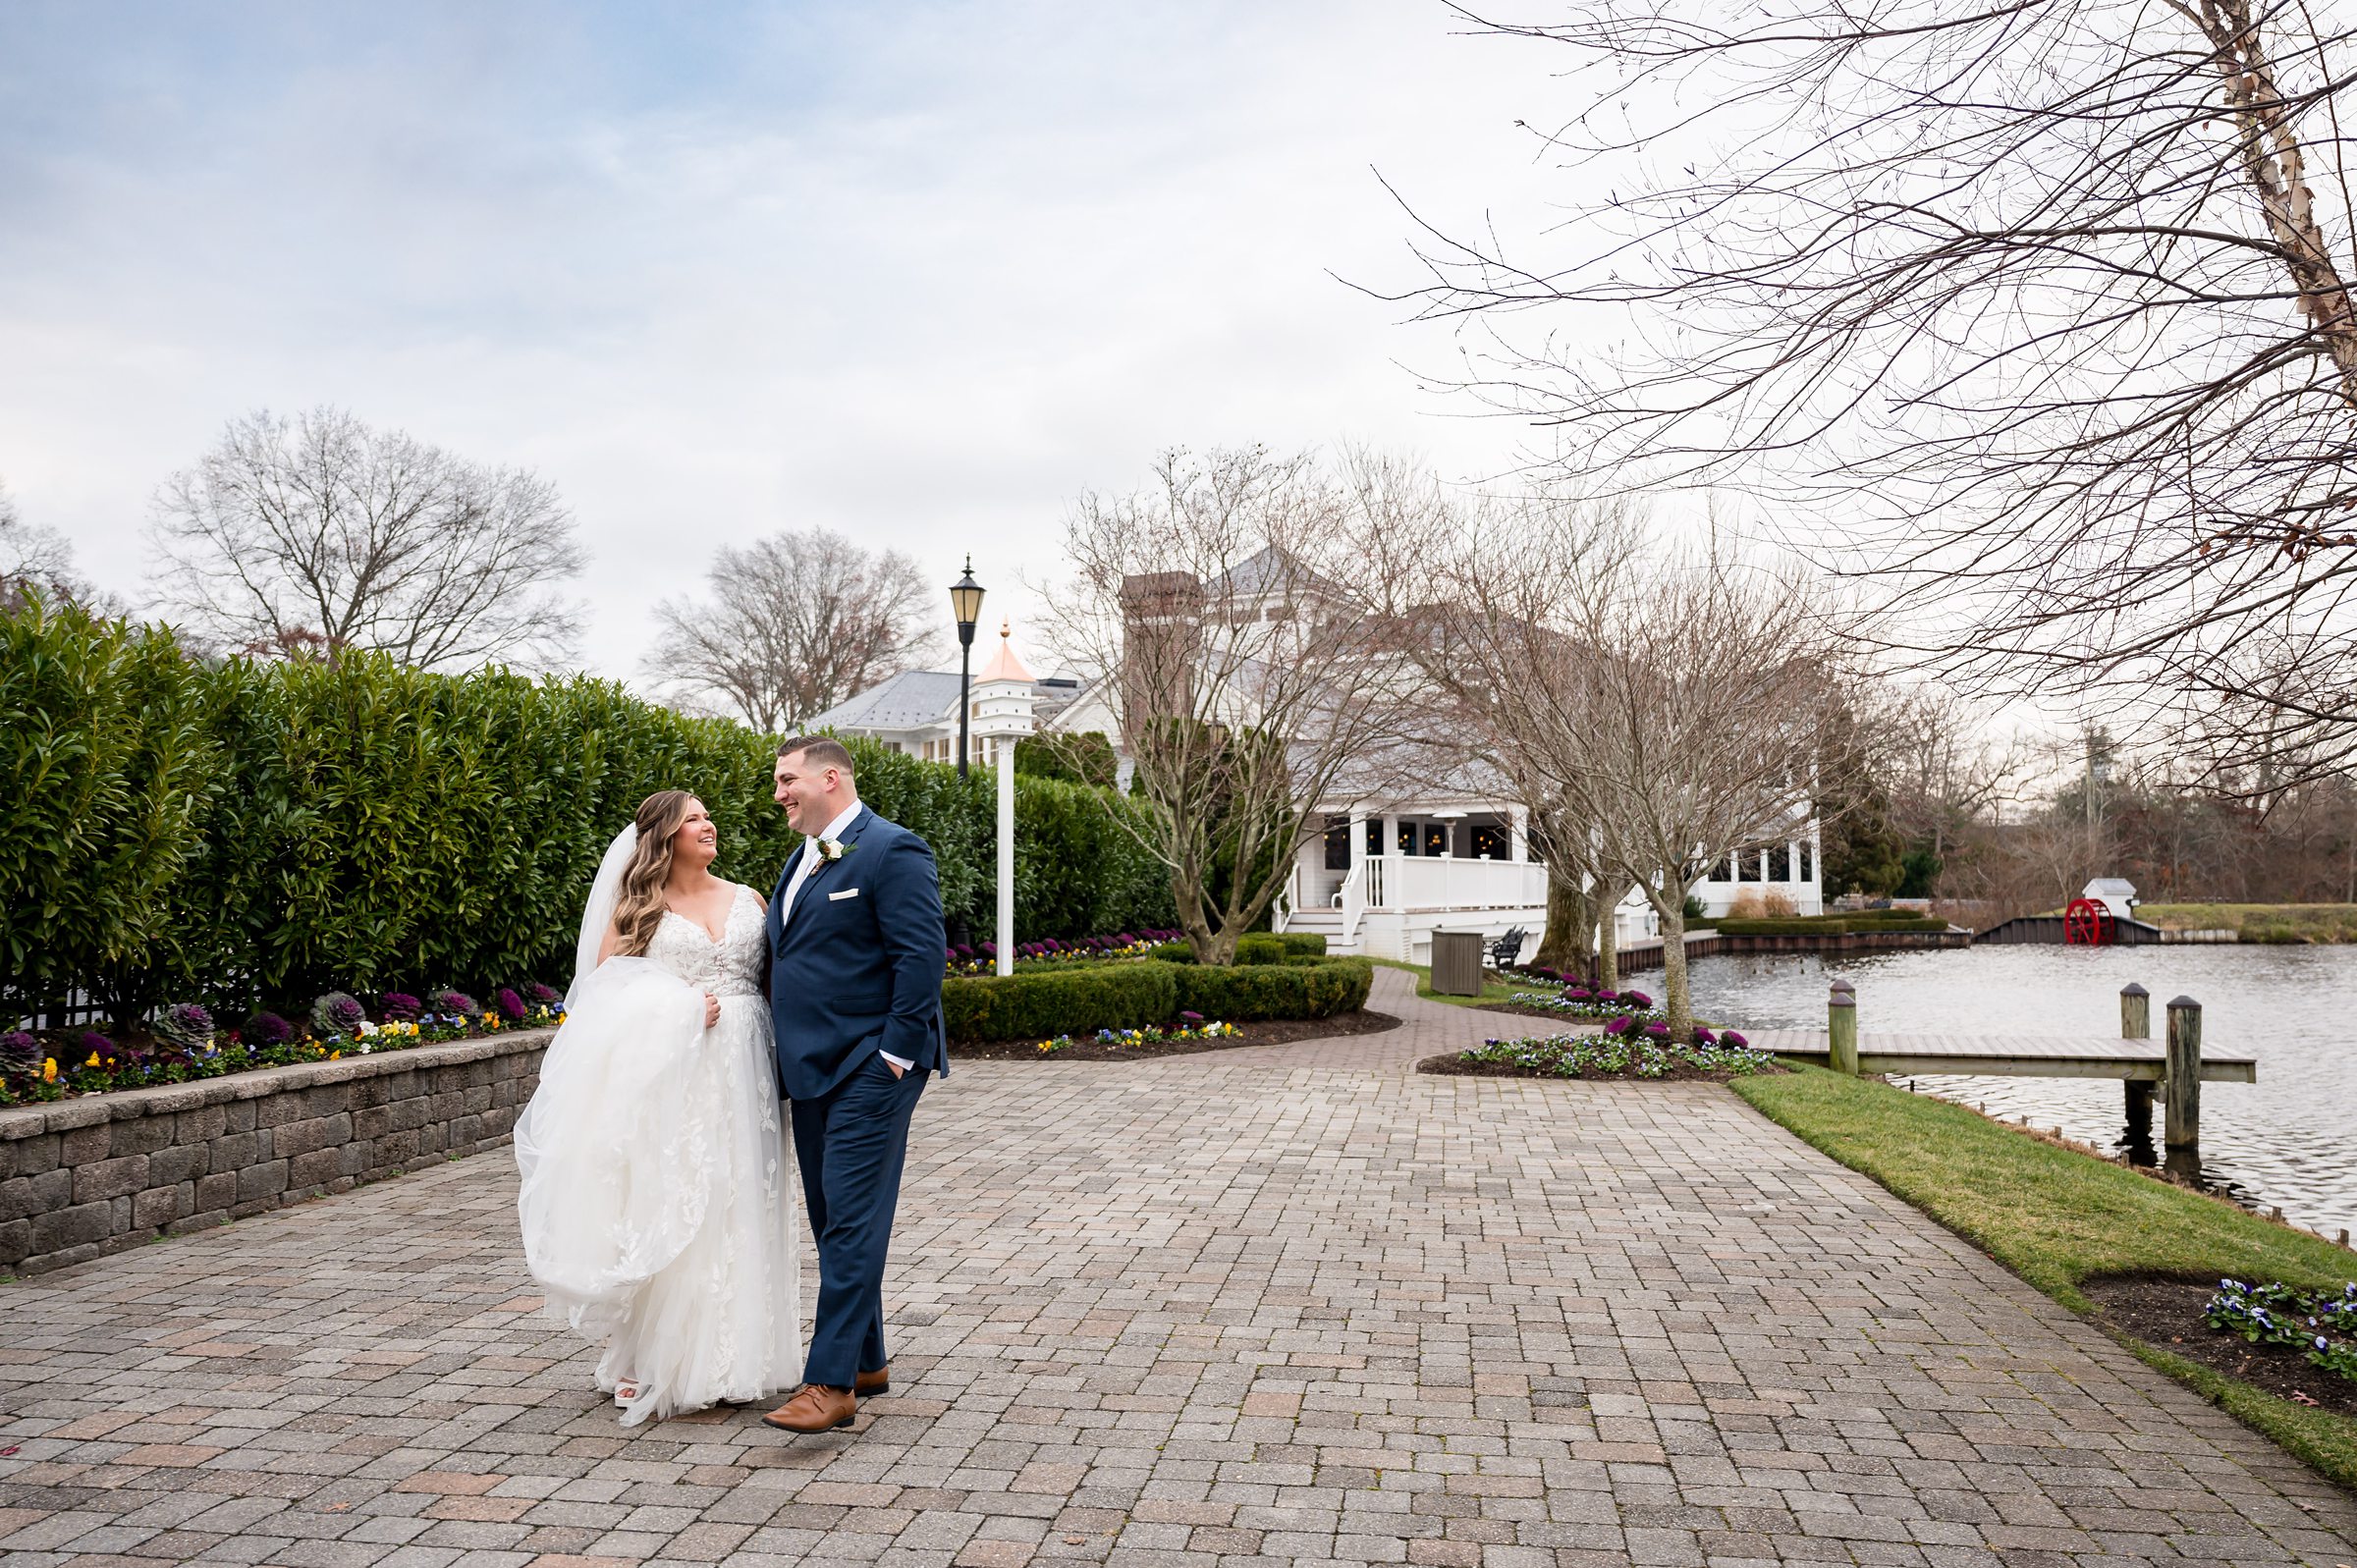 A bride and groom standing in front of The Mill Lakeside Manor by a lake